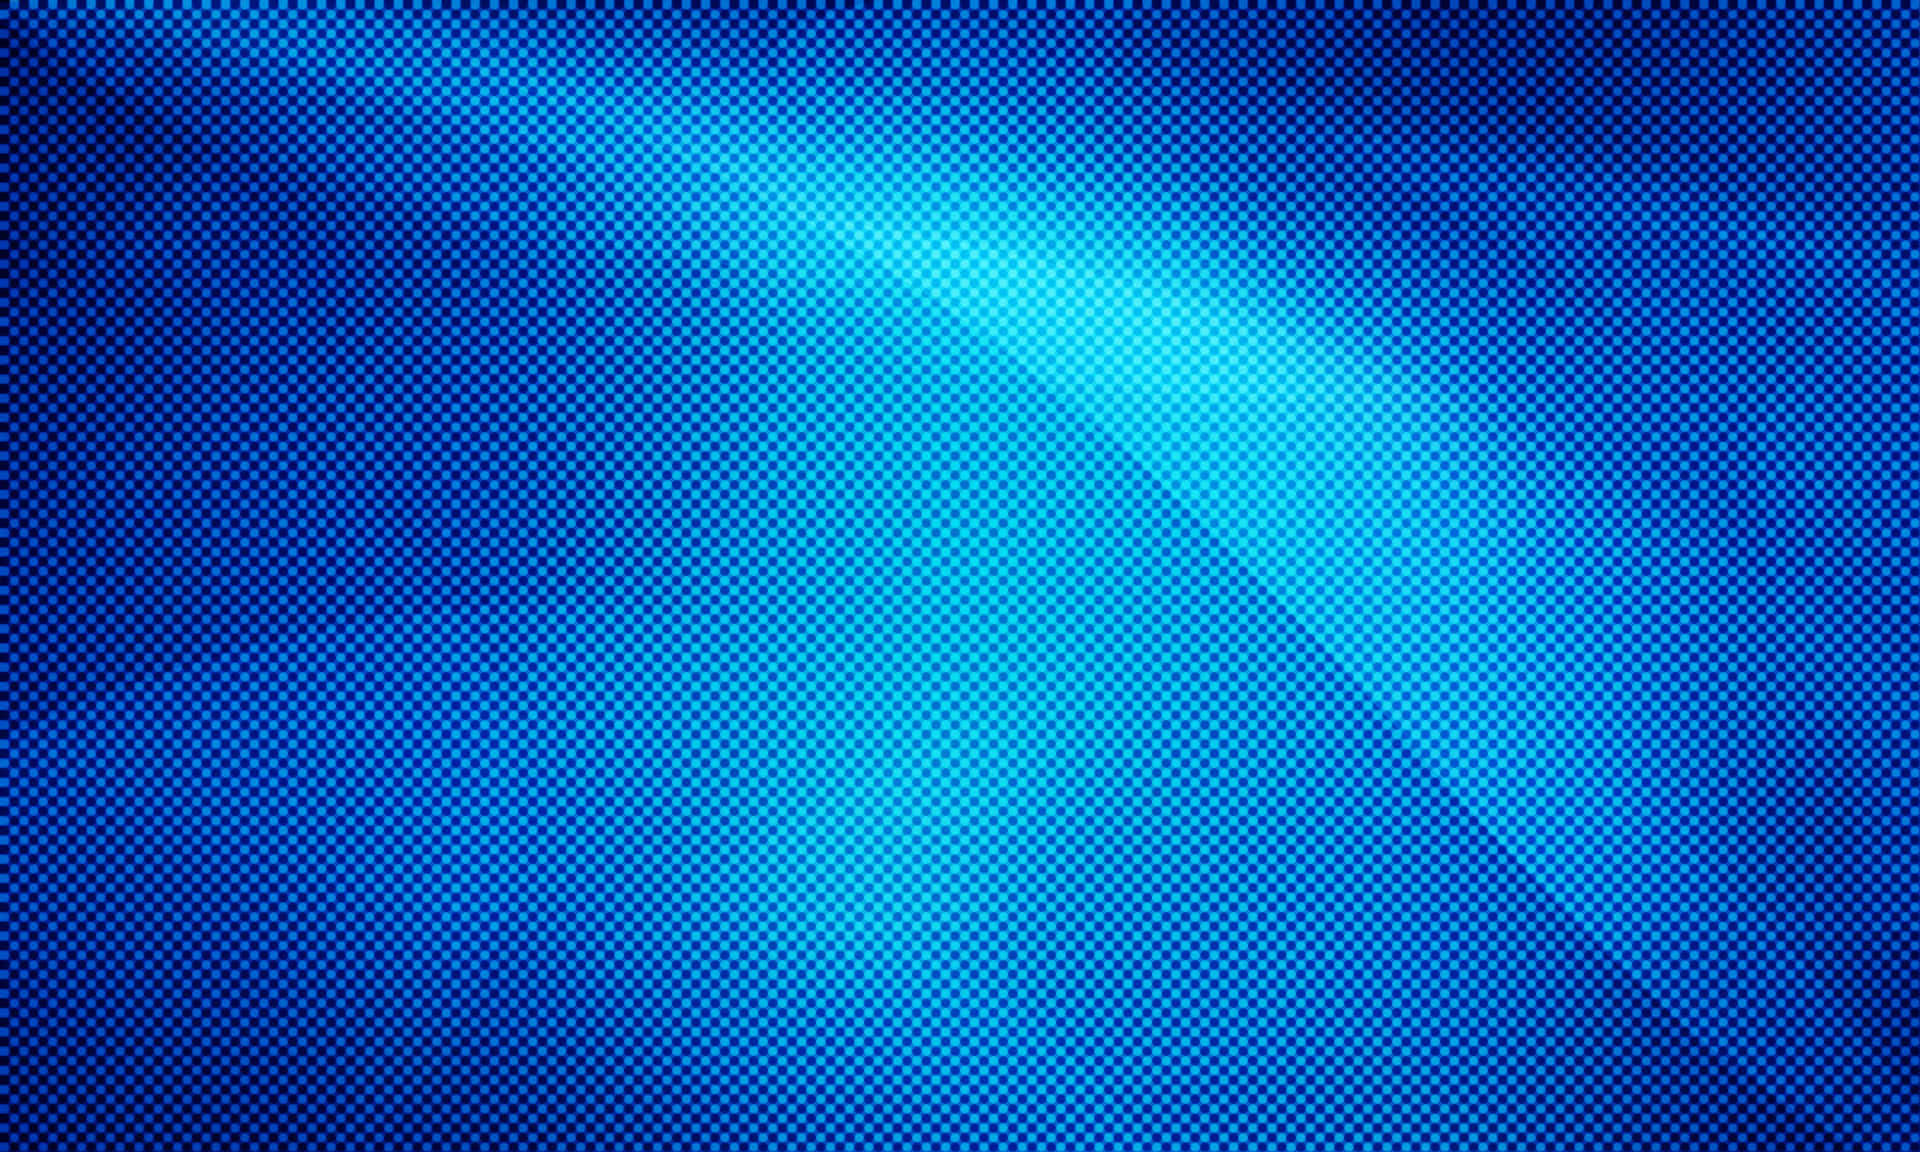 Feel the cool hues of Steel Blue at your fingertips Wallpaper